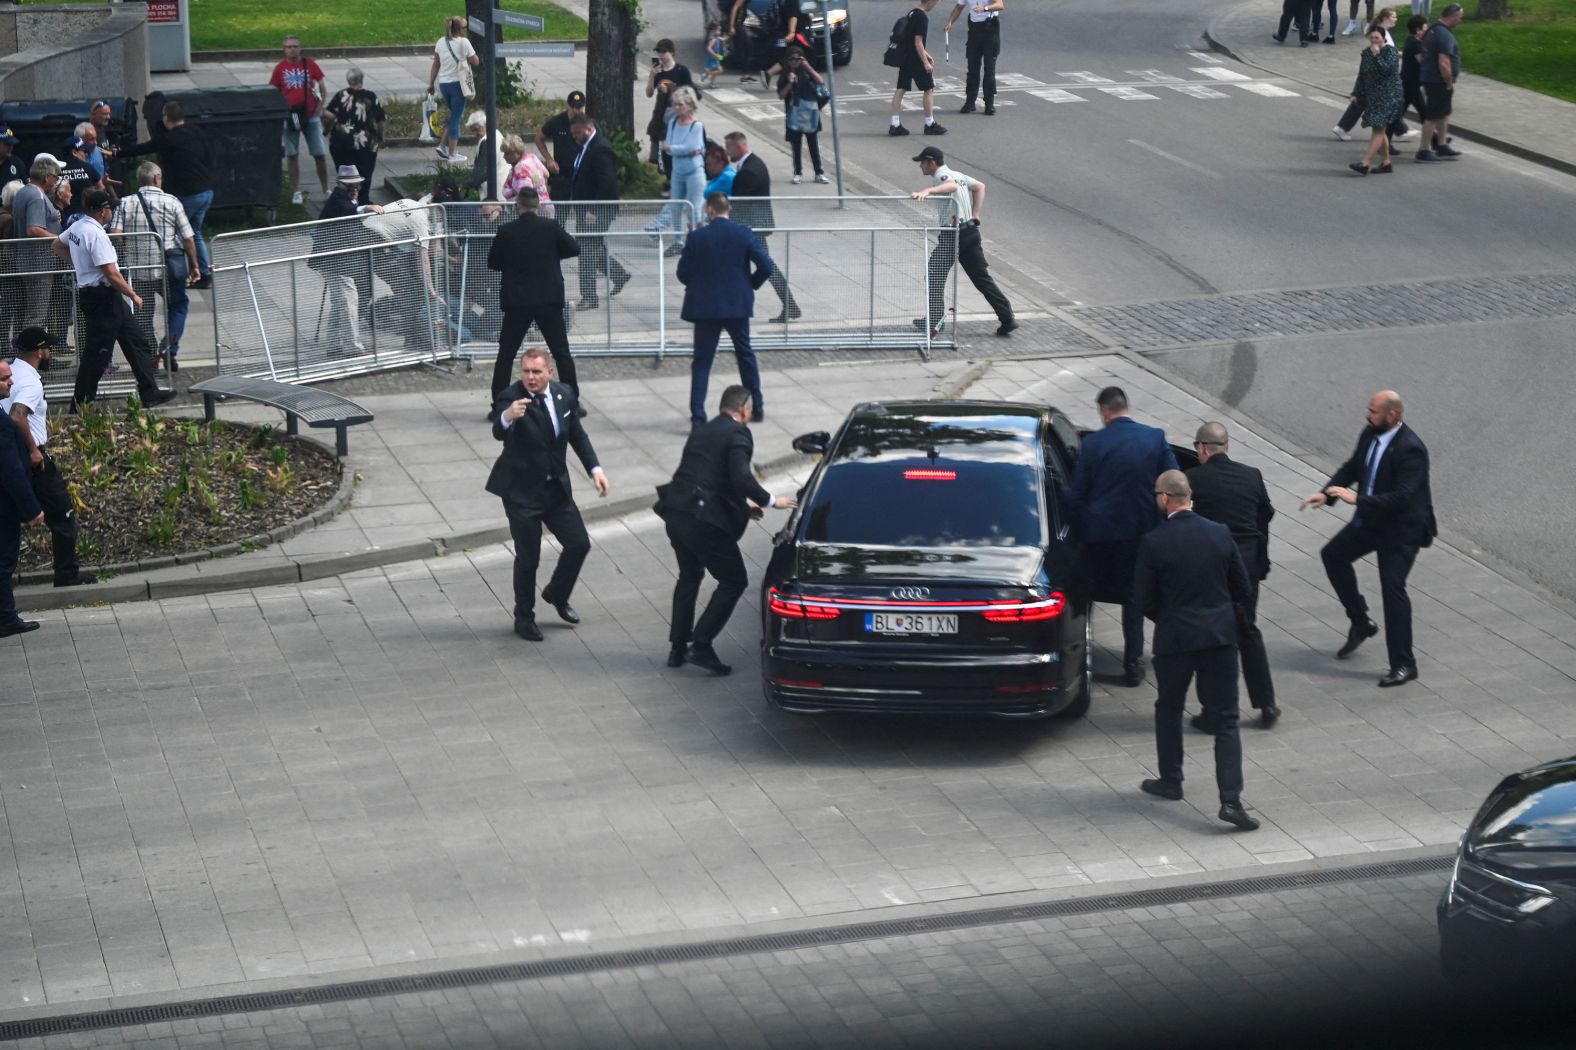 Security officers move Slovakian Prime Minister Robert Fico into a car after he was shot five times during an <a href="index.php?page=&url=https%3A%2F%2Fwww.cnn.com%2F2024%2F05%2F16%2Feurope%2Fslovakia-prime-minister-fico-out-of-danger-intl-hnk%2Findex.html" target="_blank">assassination attempt</a> in Handlová, Slovakia, on Wednesday, May 15. Fico was conscious and able to speak on Thursday afternoon, but he was still in serious condition, according to Slovakian President-elect Peter Pellegrini. Police have charged a man with attempted murder.